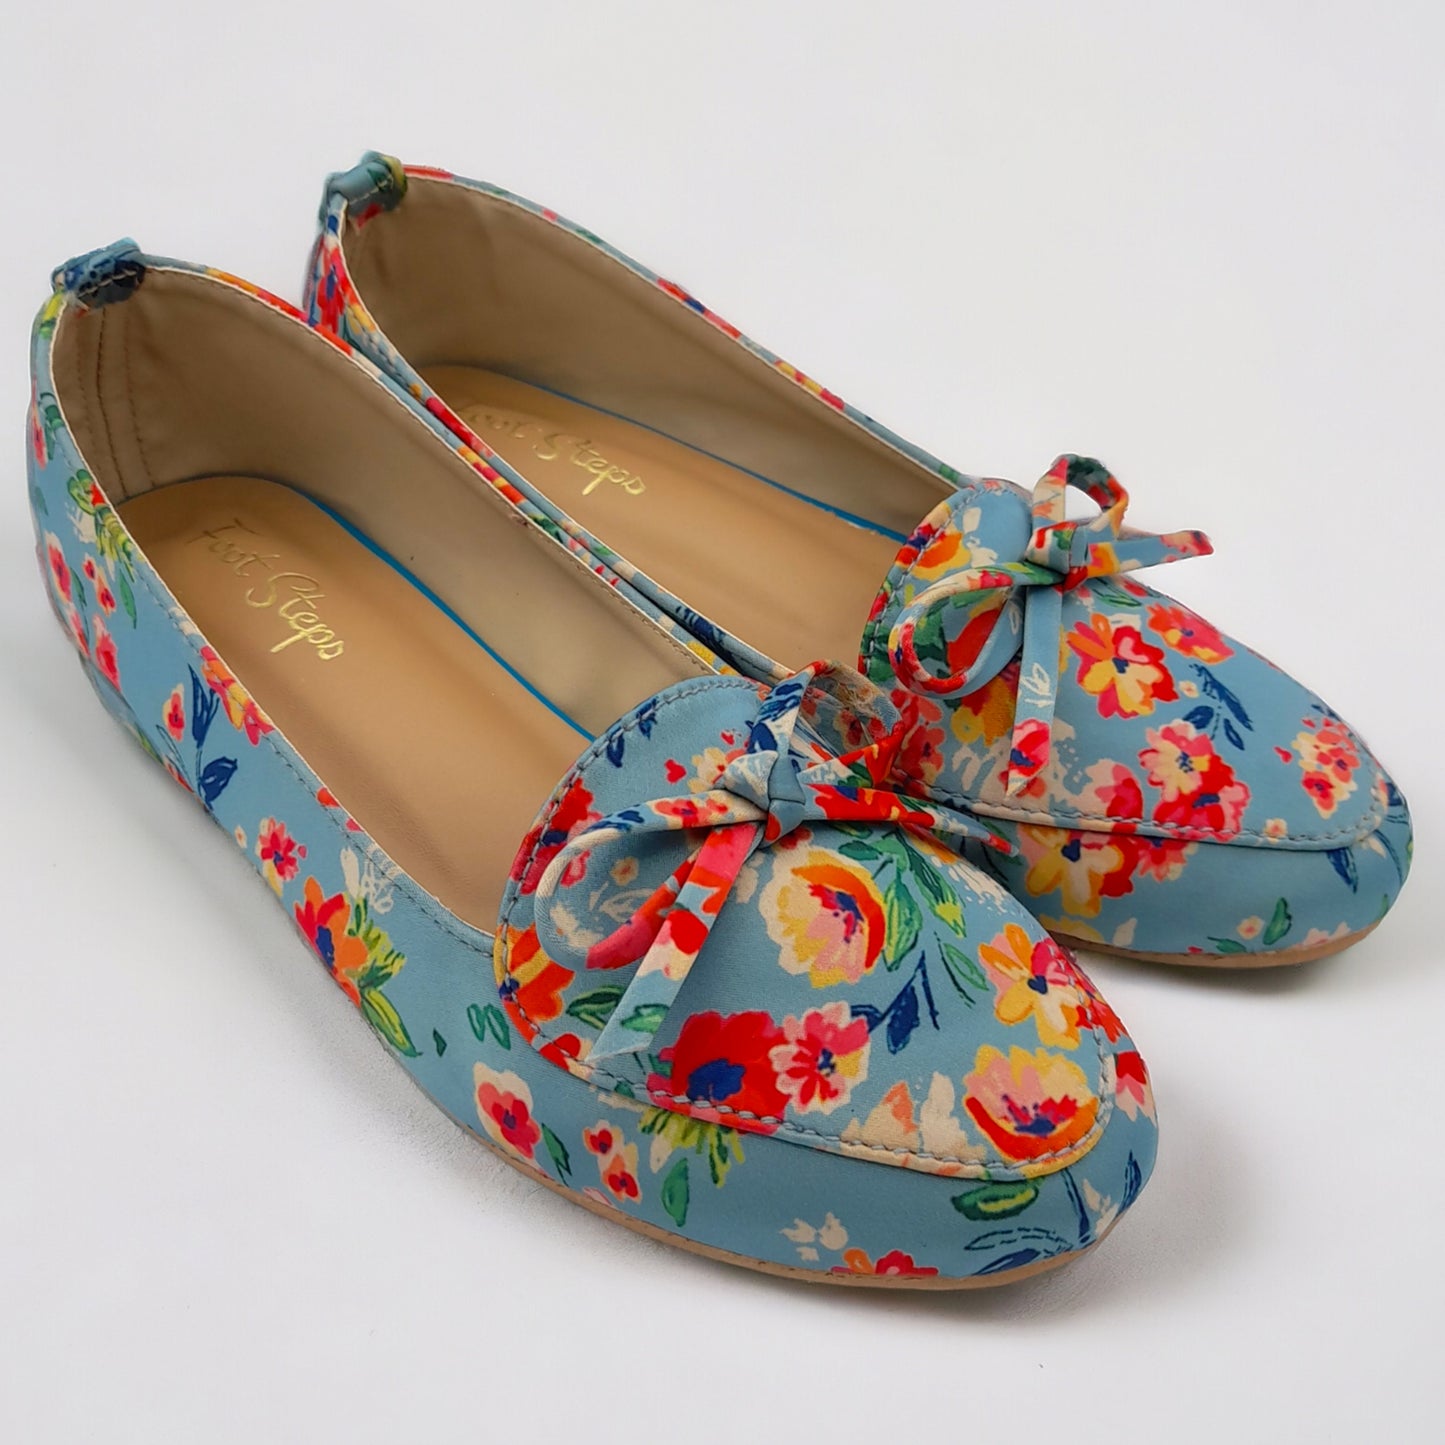 Floral Printed Loafer Shoes